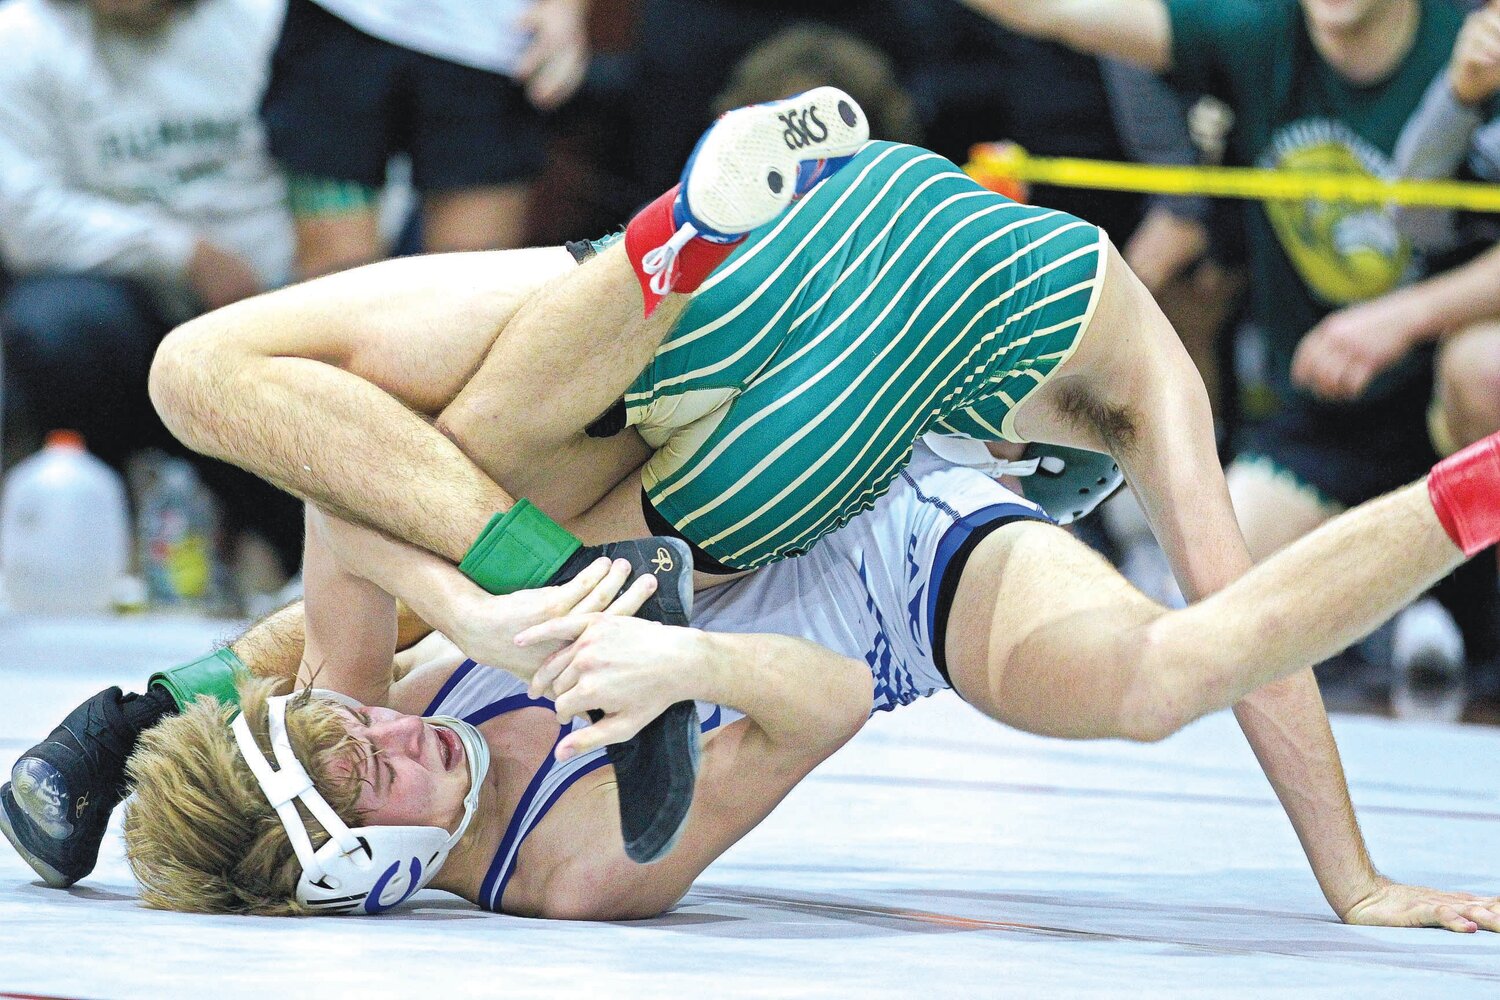 Clay High’s Jacob Bucci, in white, battles upside down with Fleming Island’s Matthew Newman in 2023 action. Both Bucci and Newman will be key athletes for their respective teams as area grapplers ramp up their seasons.